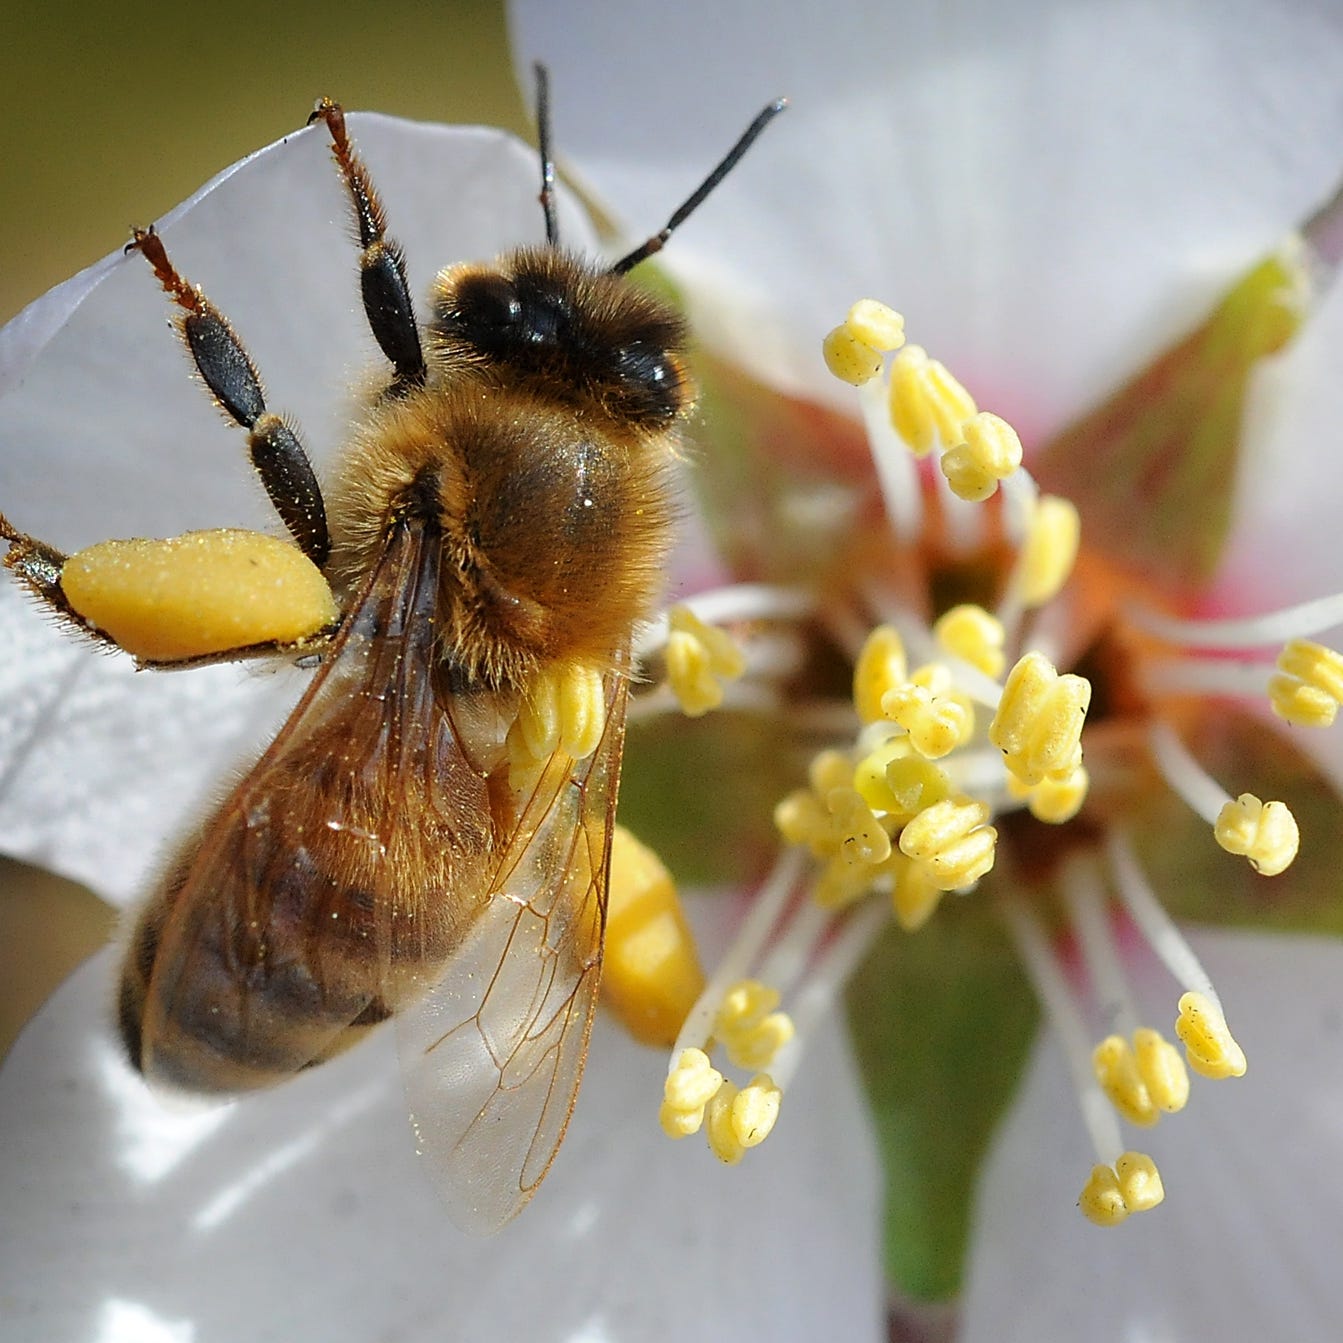 A honey bee works on a flower blossom with pollen sacks attached to its legs, off of Airport Way south of French Camp, California on Feb. 15, 2010.